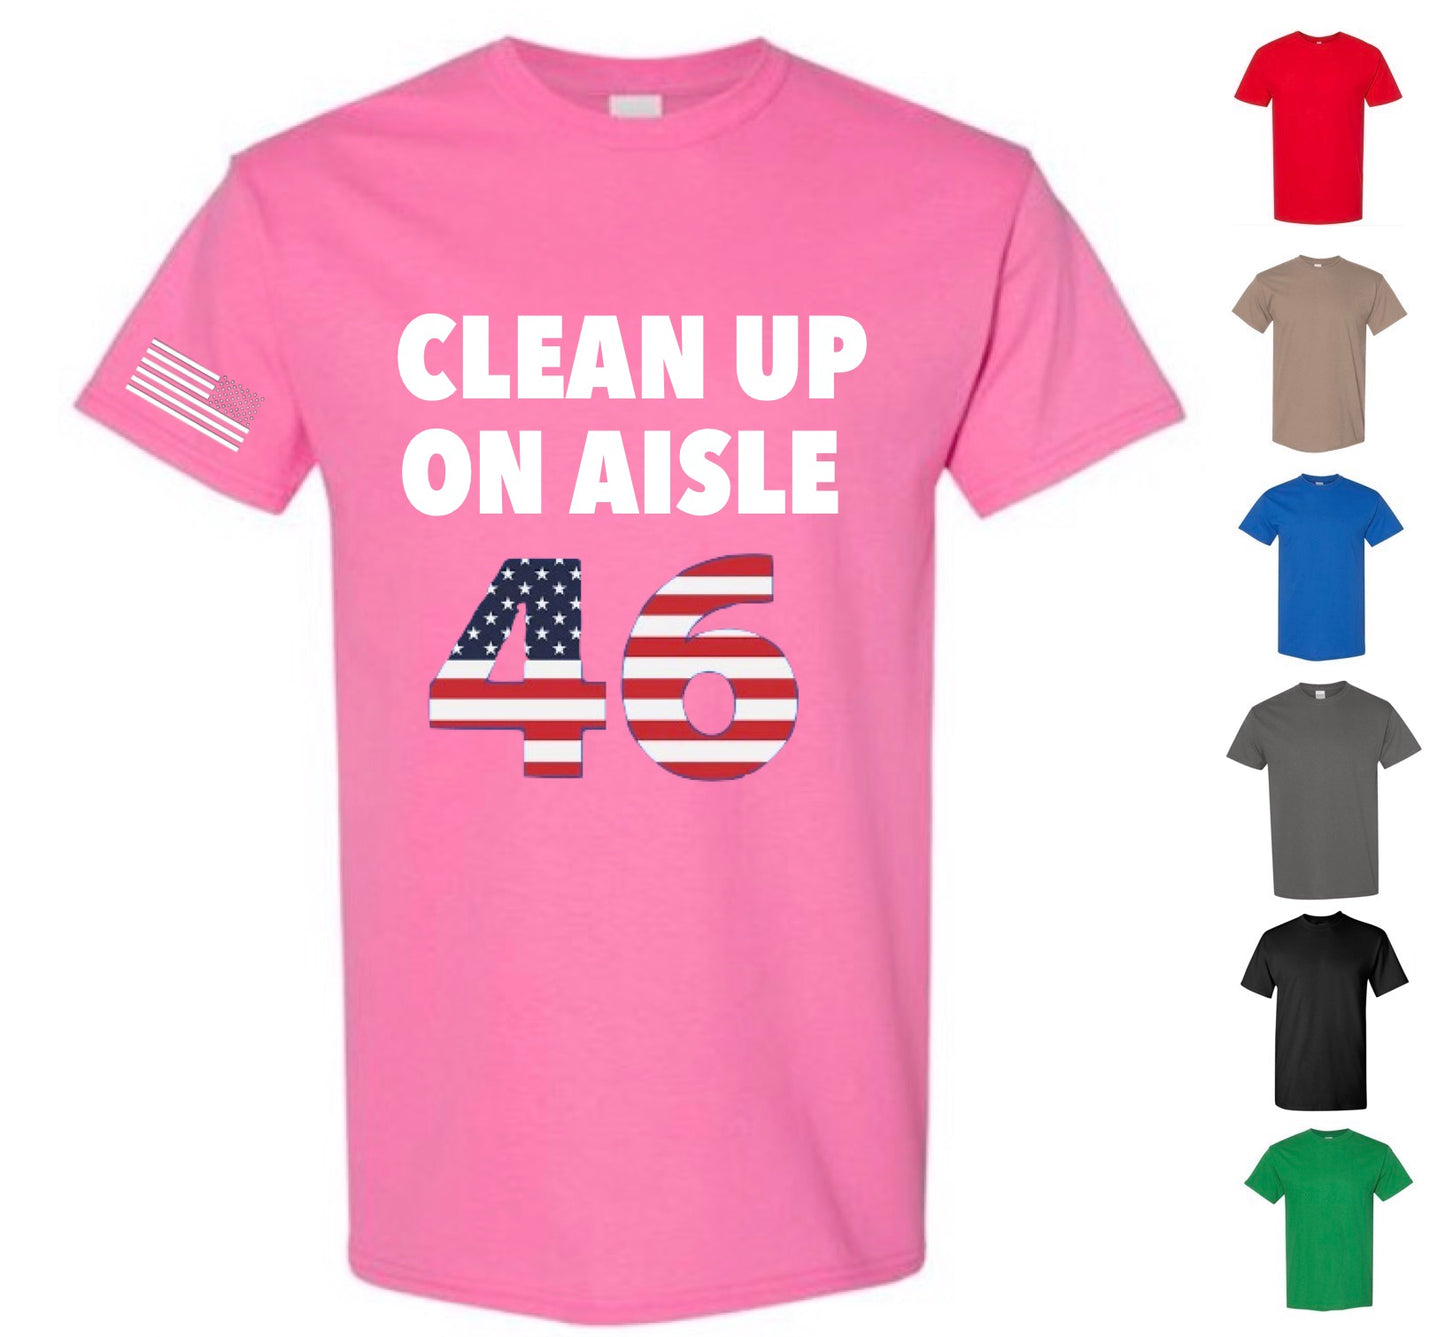 Clean Up On Aisle 46! — Free Shipping!